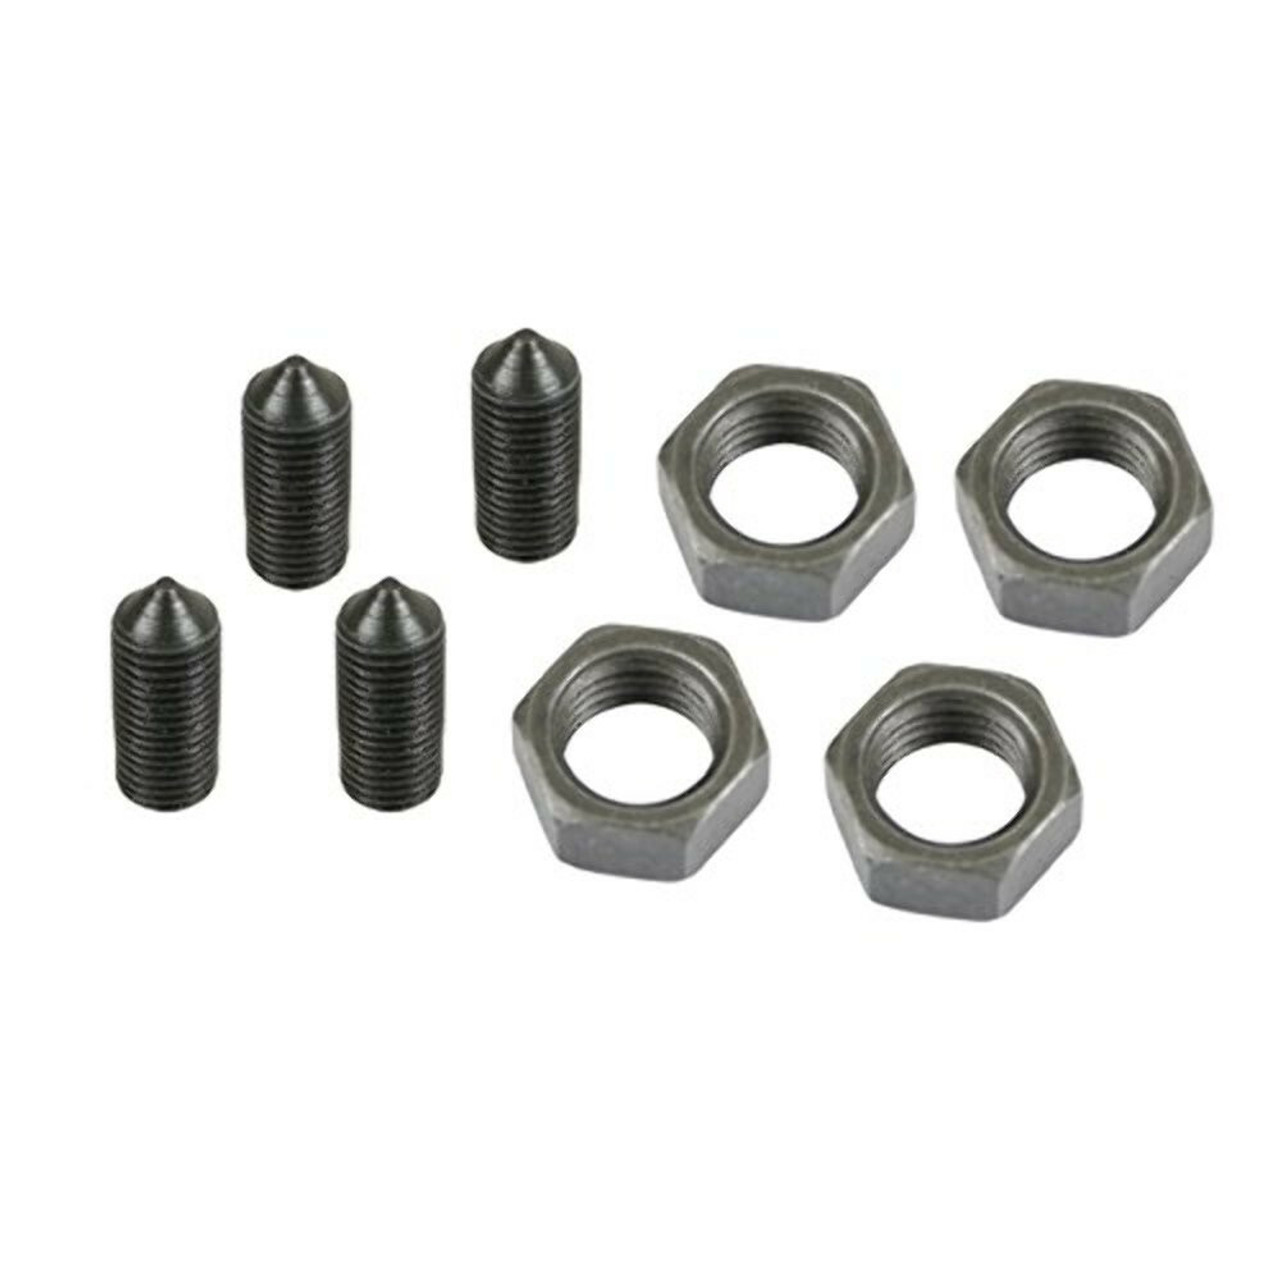 TRAILING ARM GRUB SCREW KIT, Fits All Years VW, 4 Pack, Dunebuggy & VW